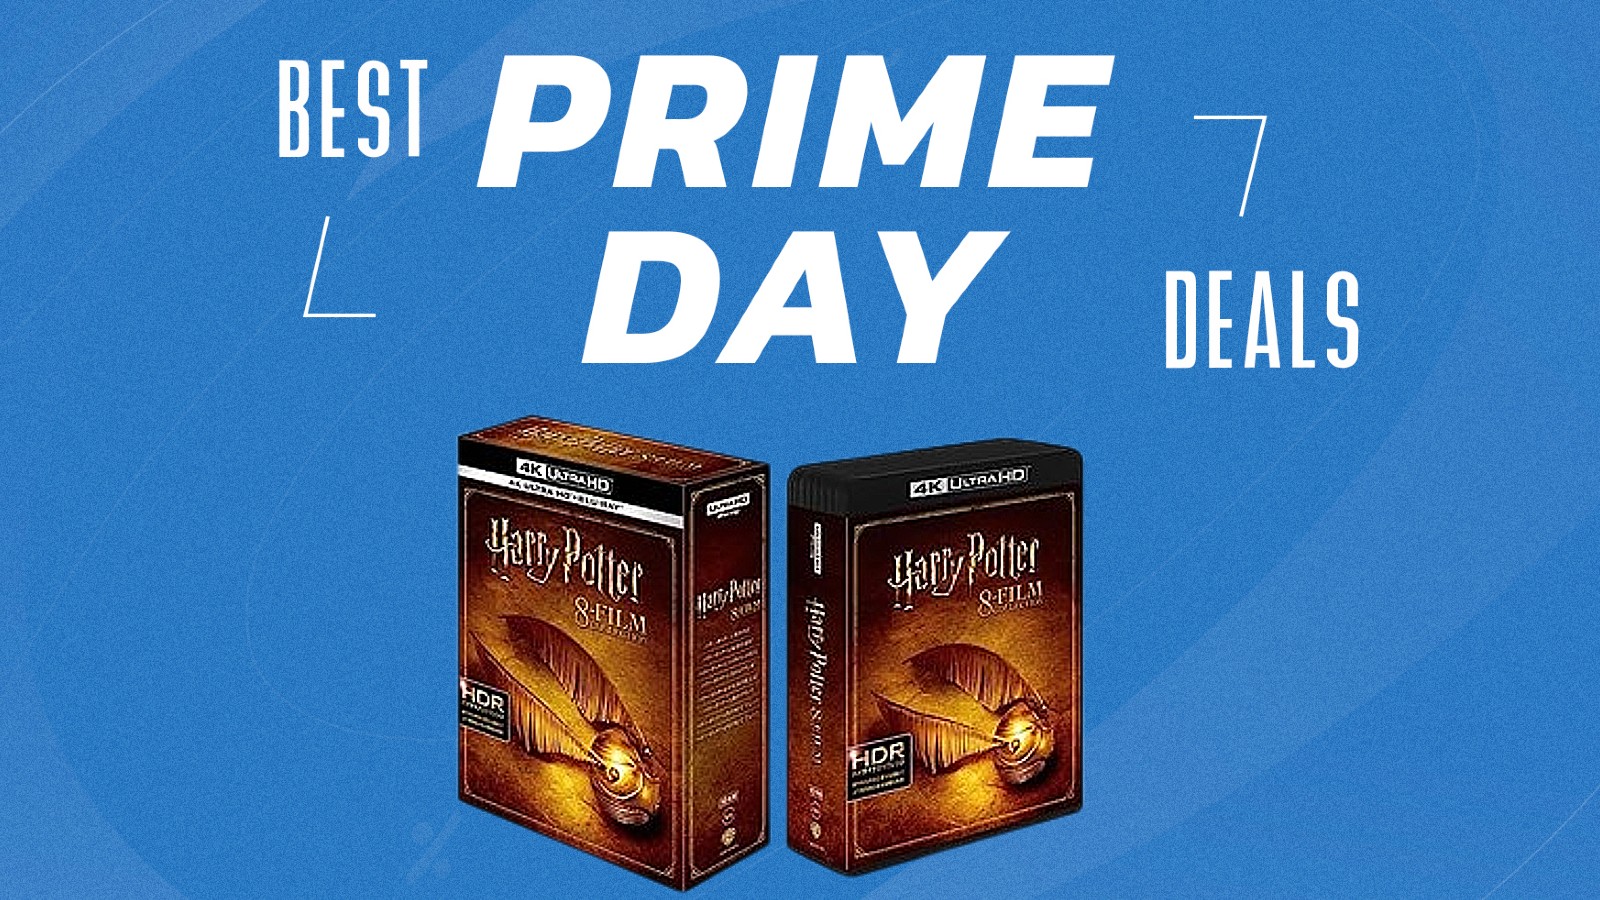 Harry Potter Isn't On Netflix So Buy This Prime Day DVD Set Instead